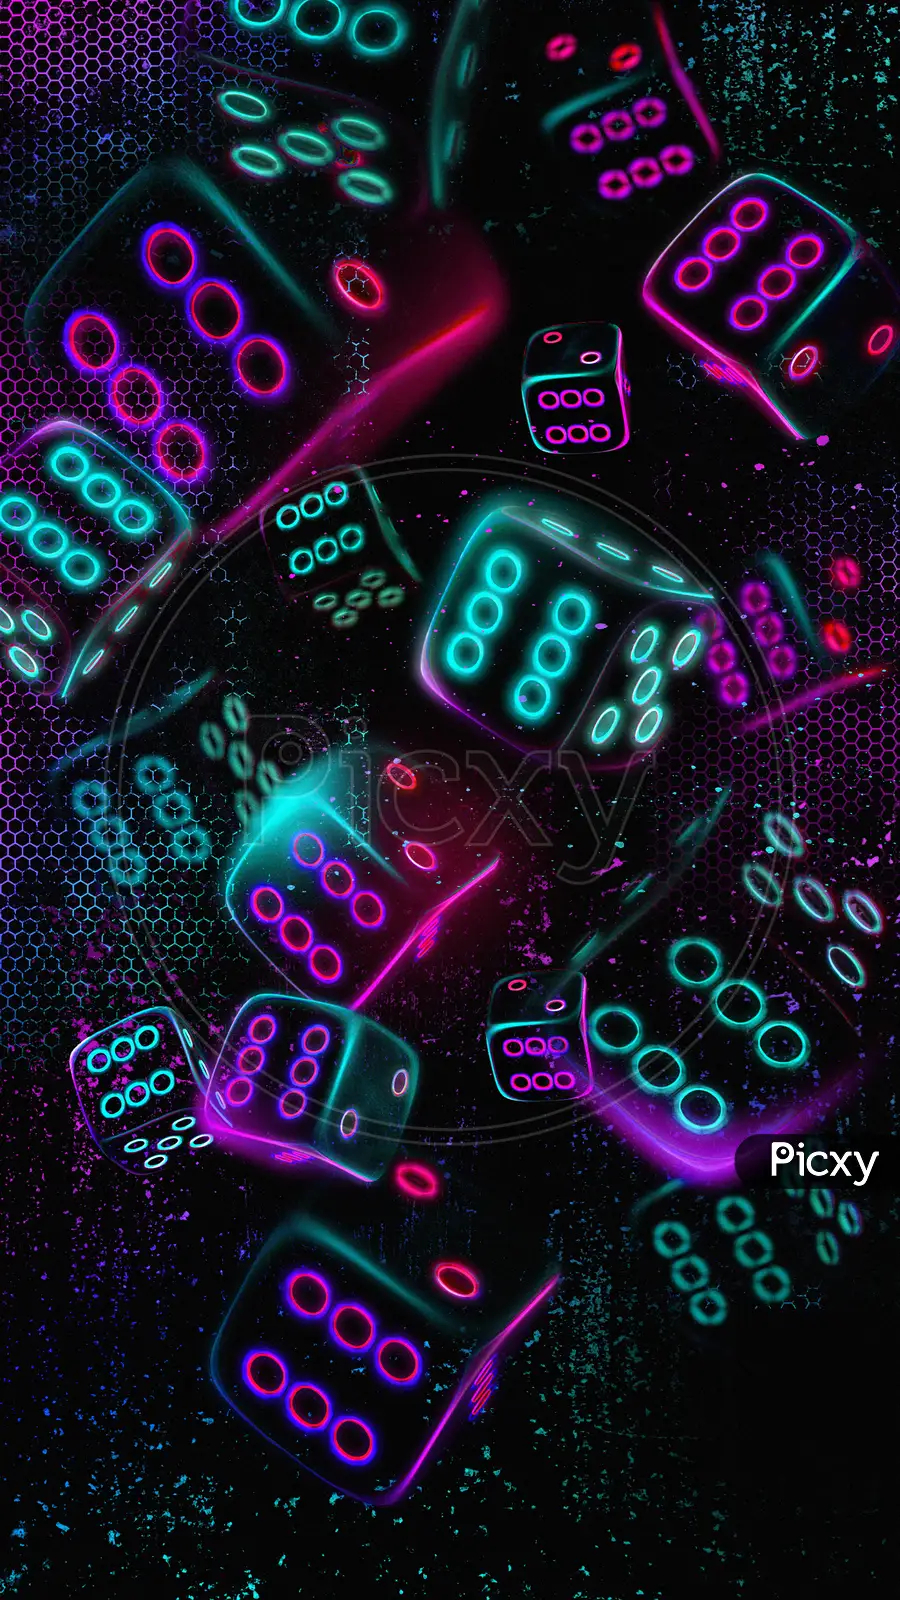 Download Dice wallpapers for mobile phone free Dice HD pictures